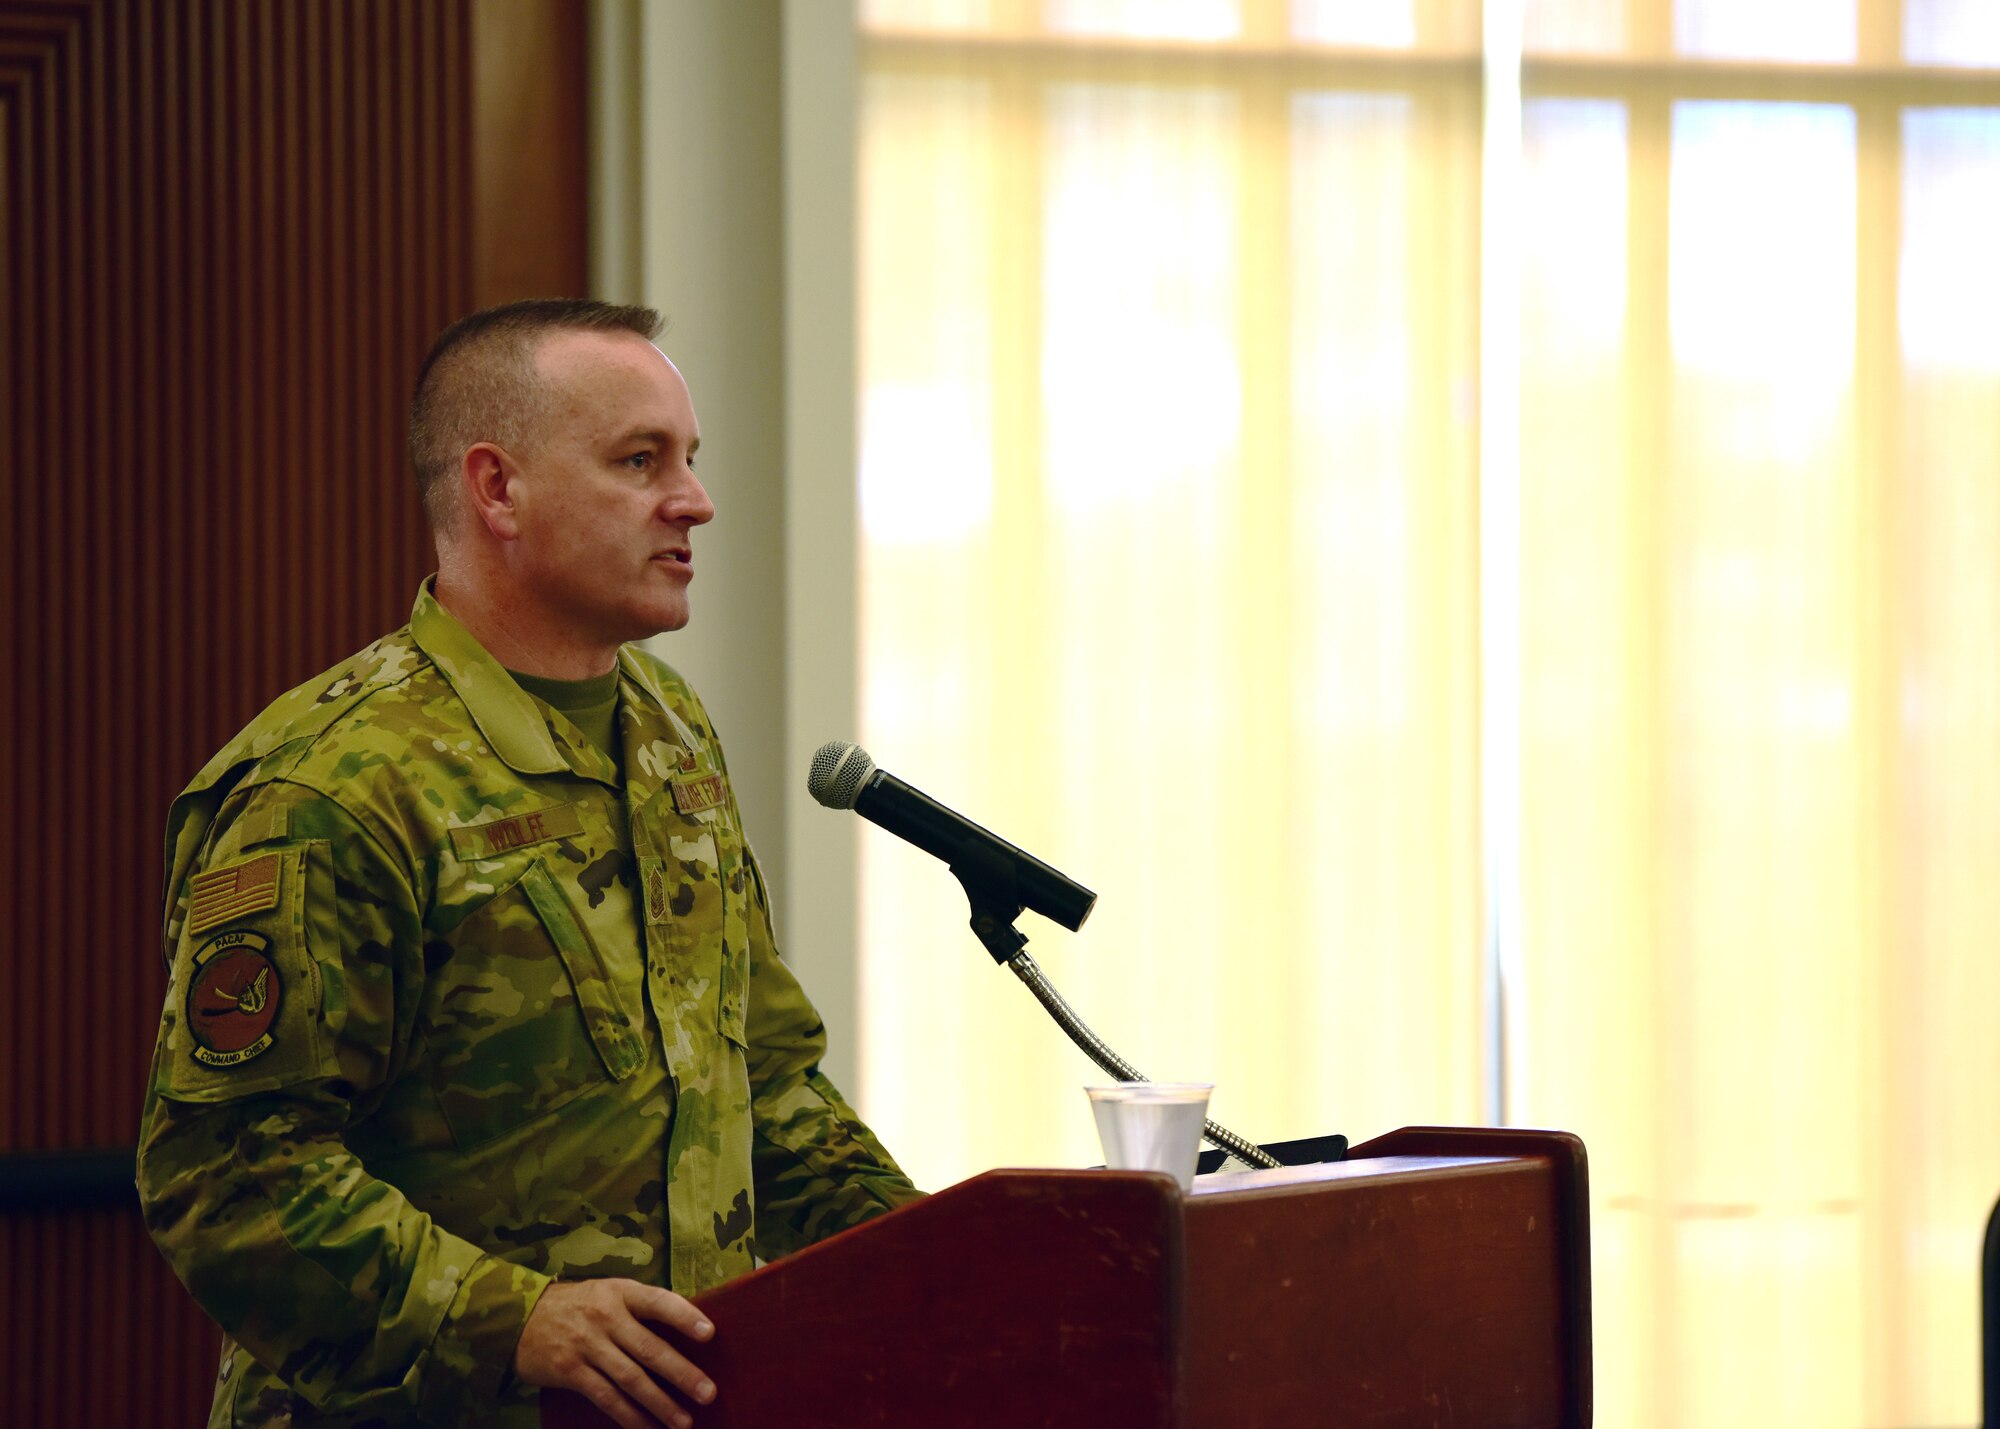 Photo of U.S. Air Force chief master sergeant briefing